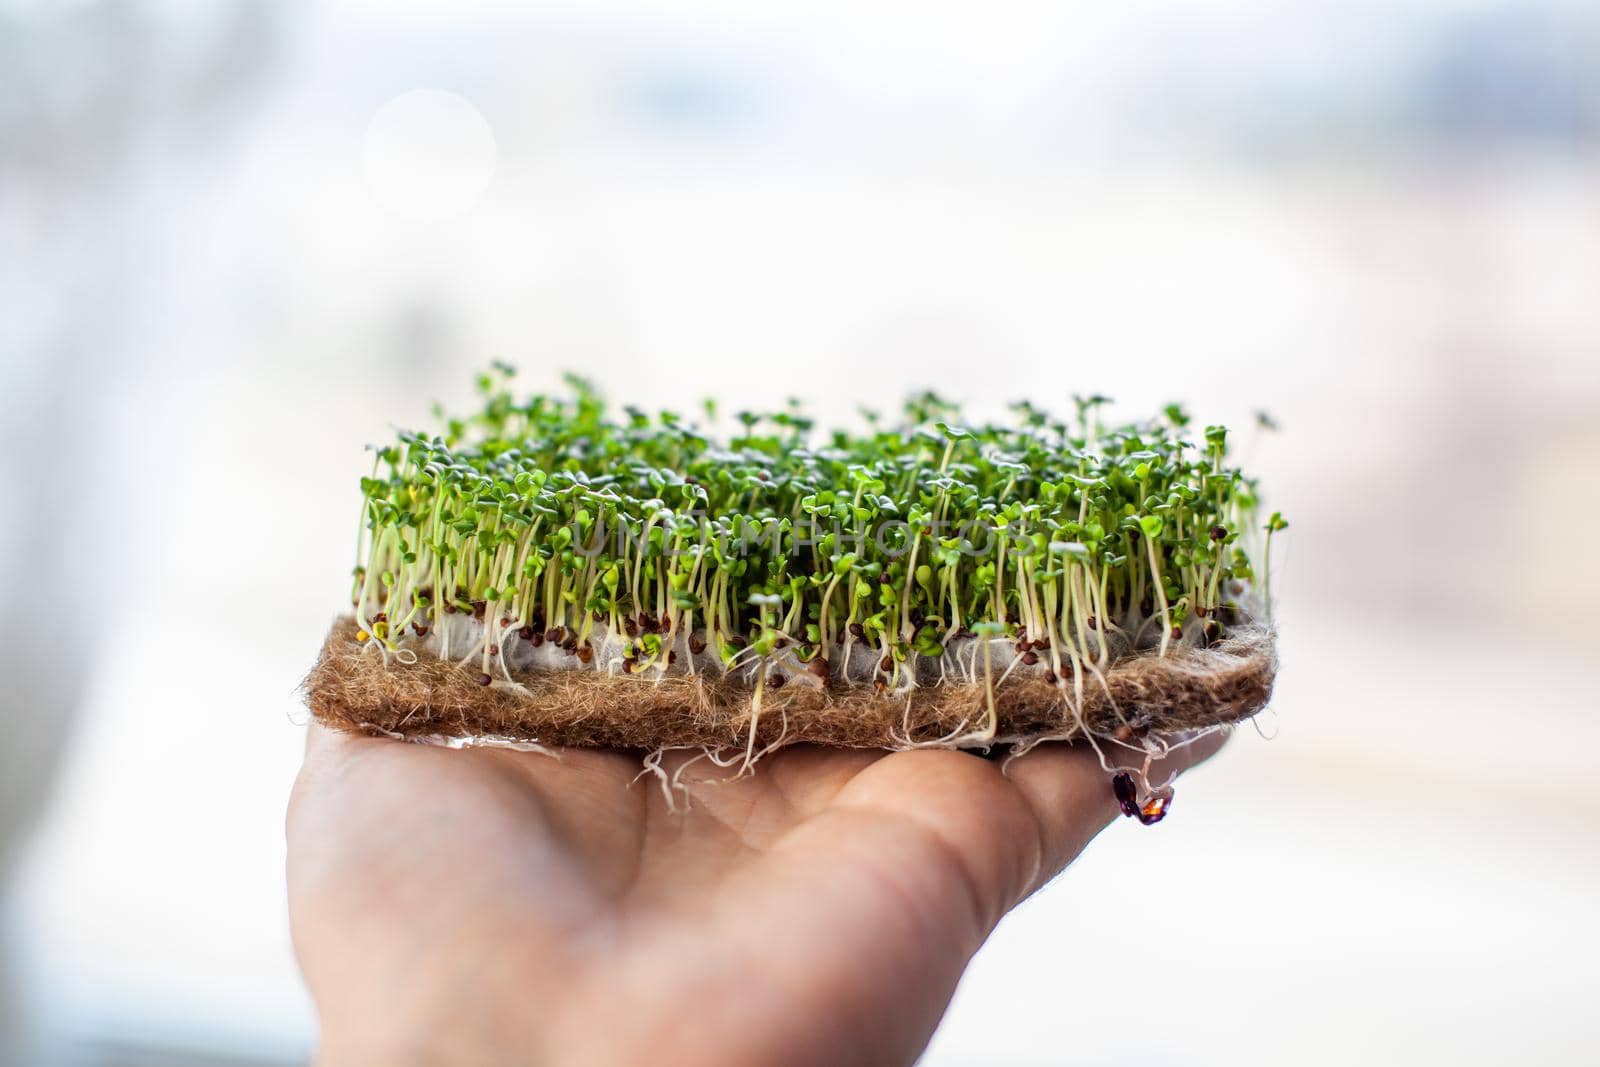 Micro-greens of mustard, arugula and other plants in the hands of men. Growing mustard sprouts in close-up at home. The concept of vegan and healthy food. Sprouted seeds, micro-greens